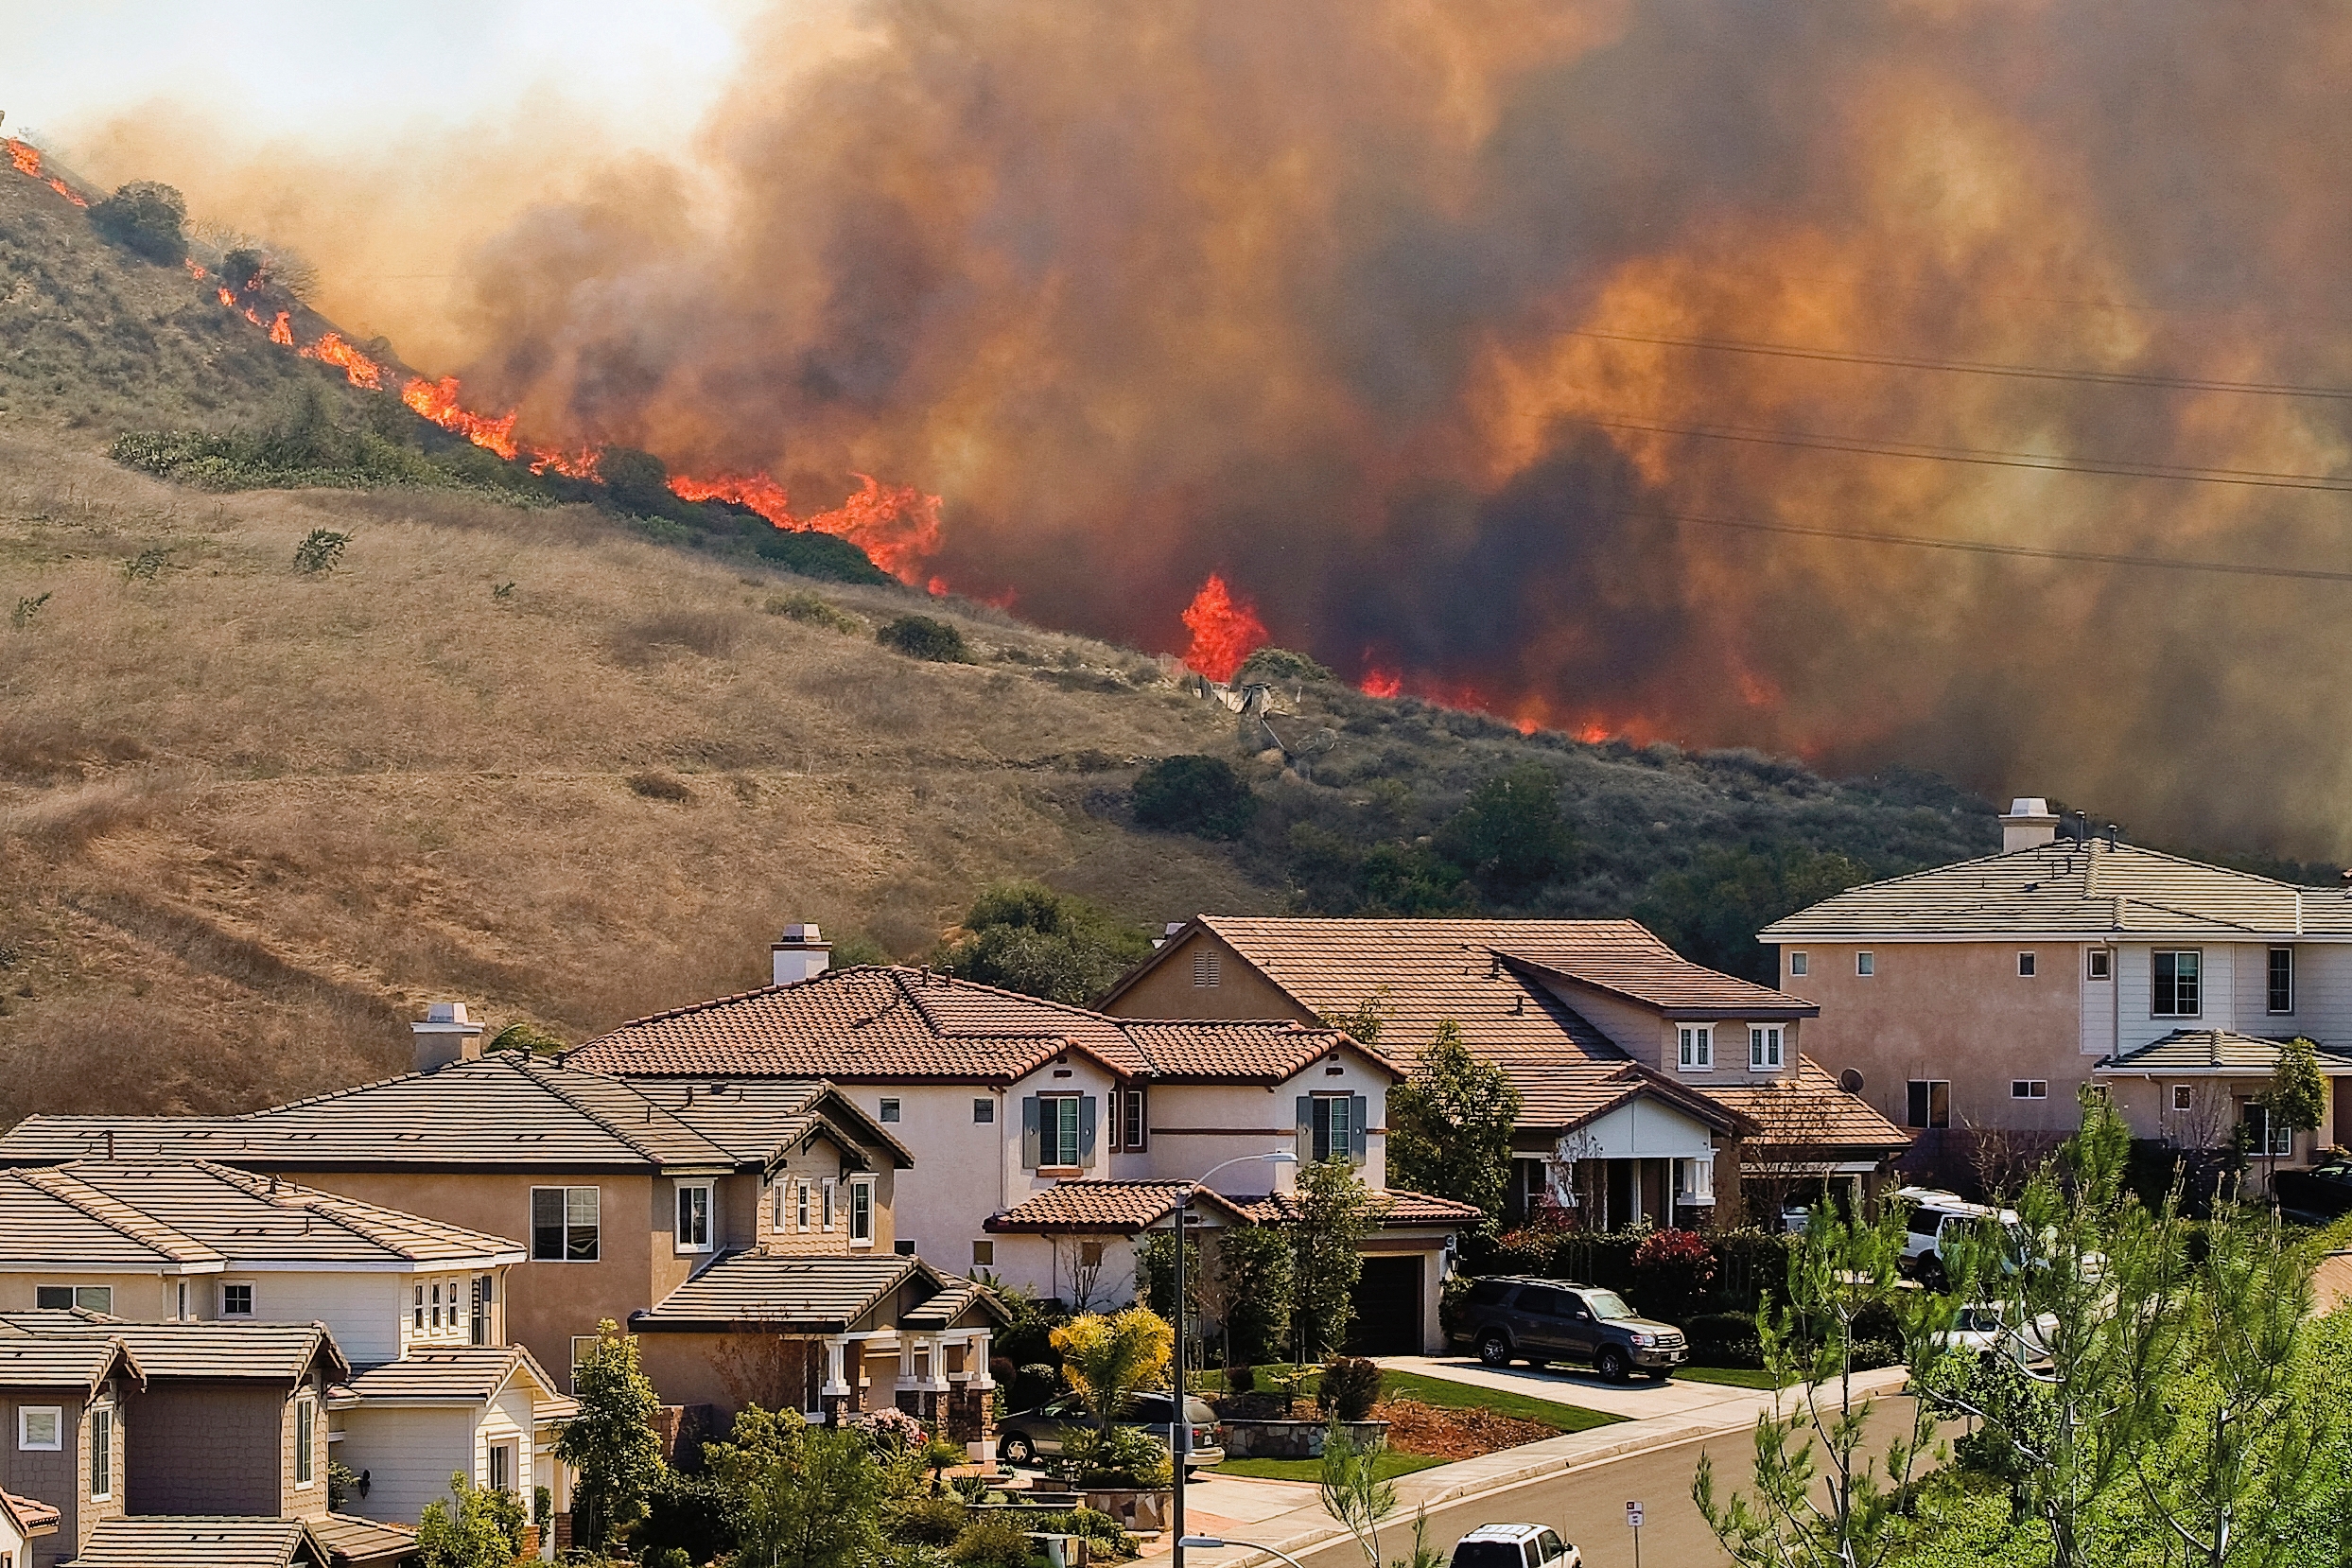 Wildfires on a hill with homes in the foreground